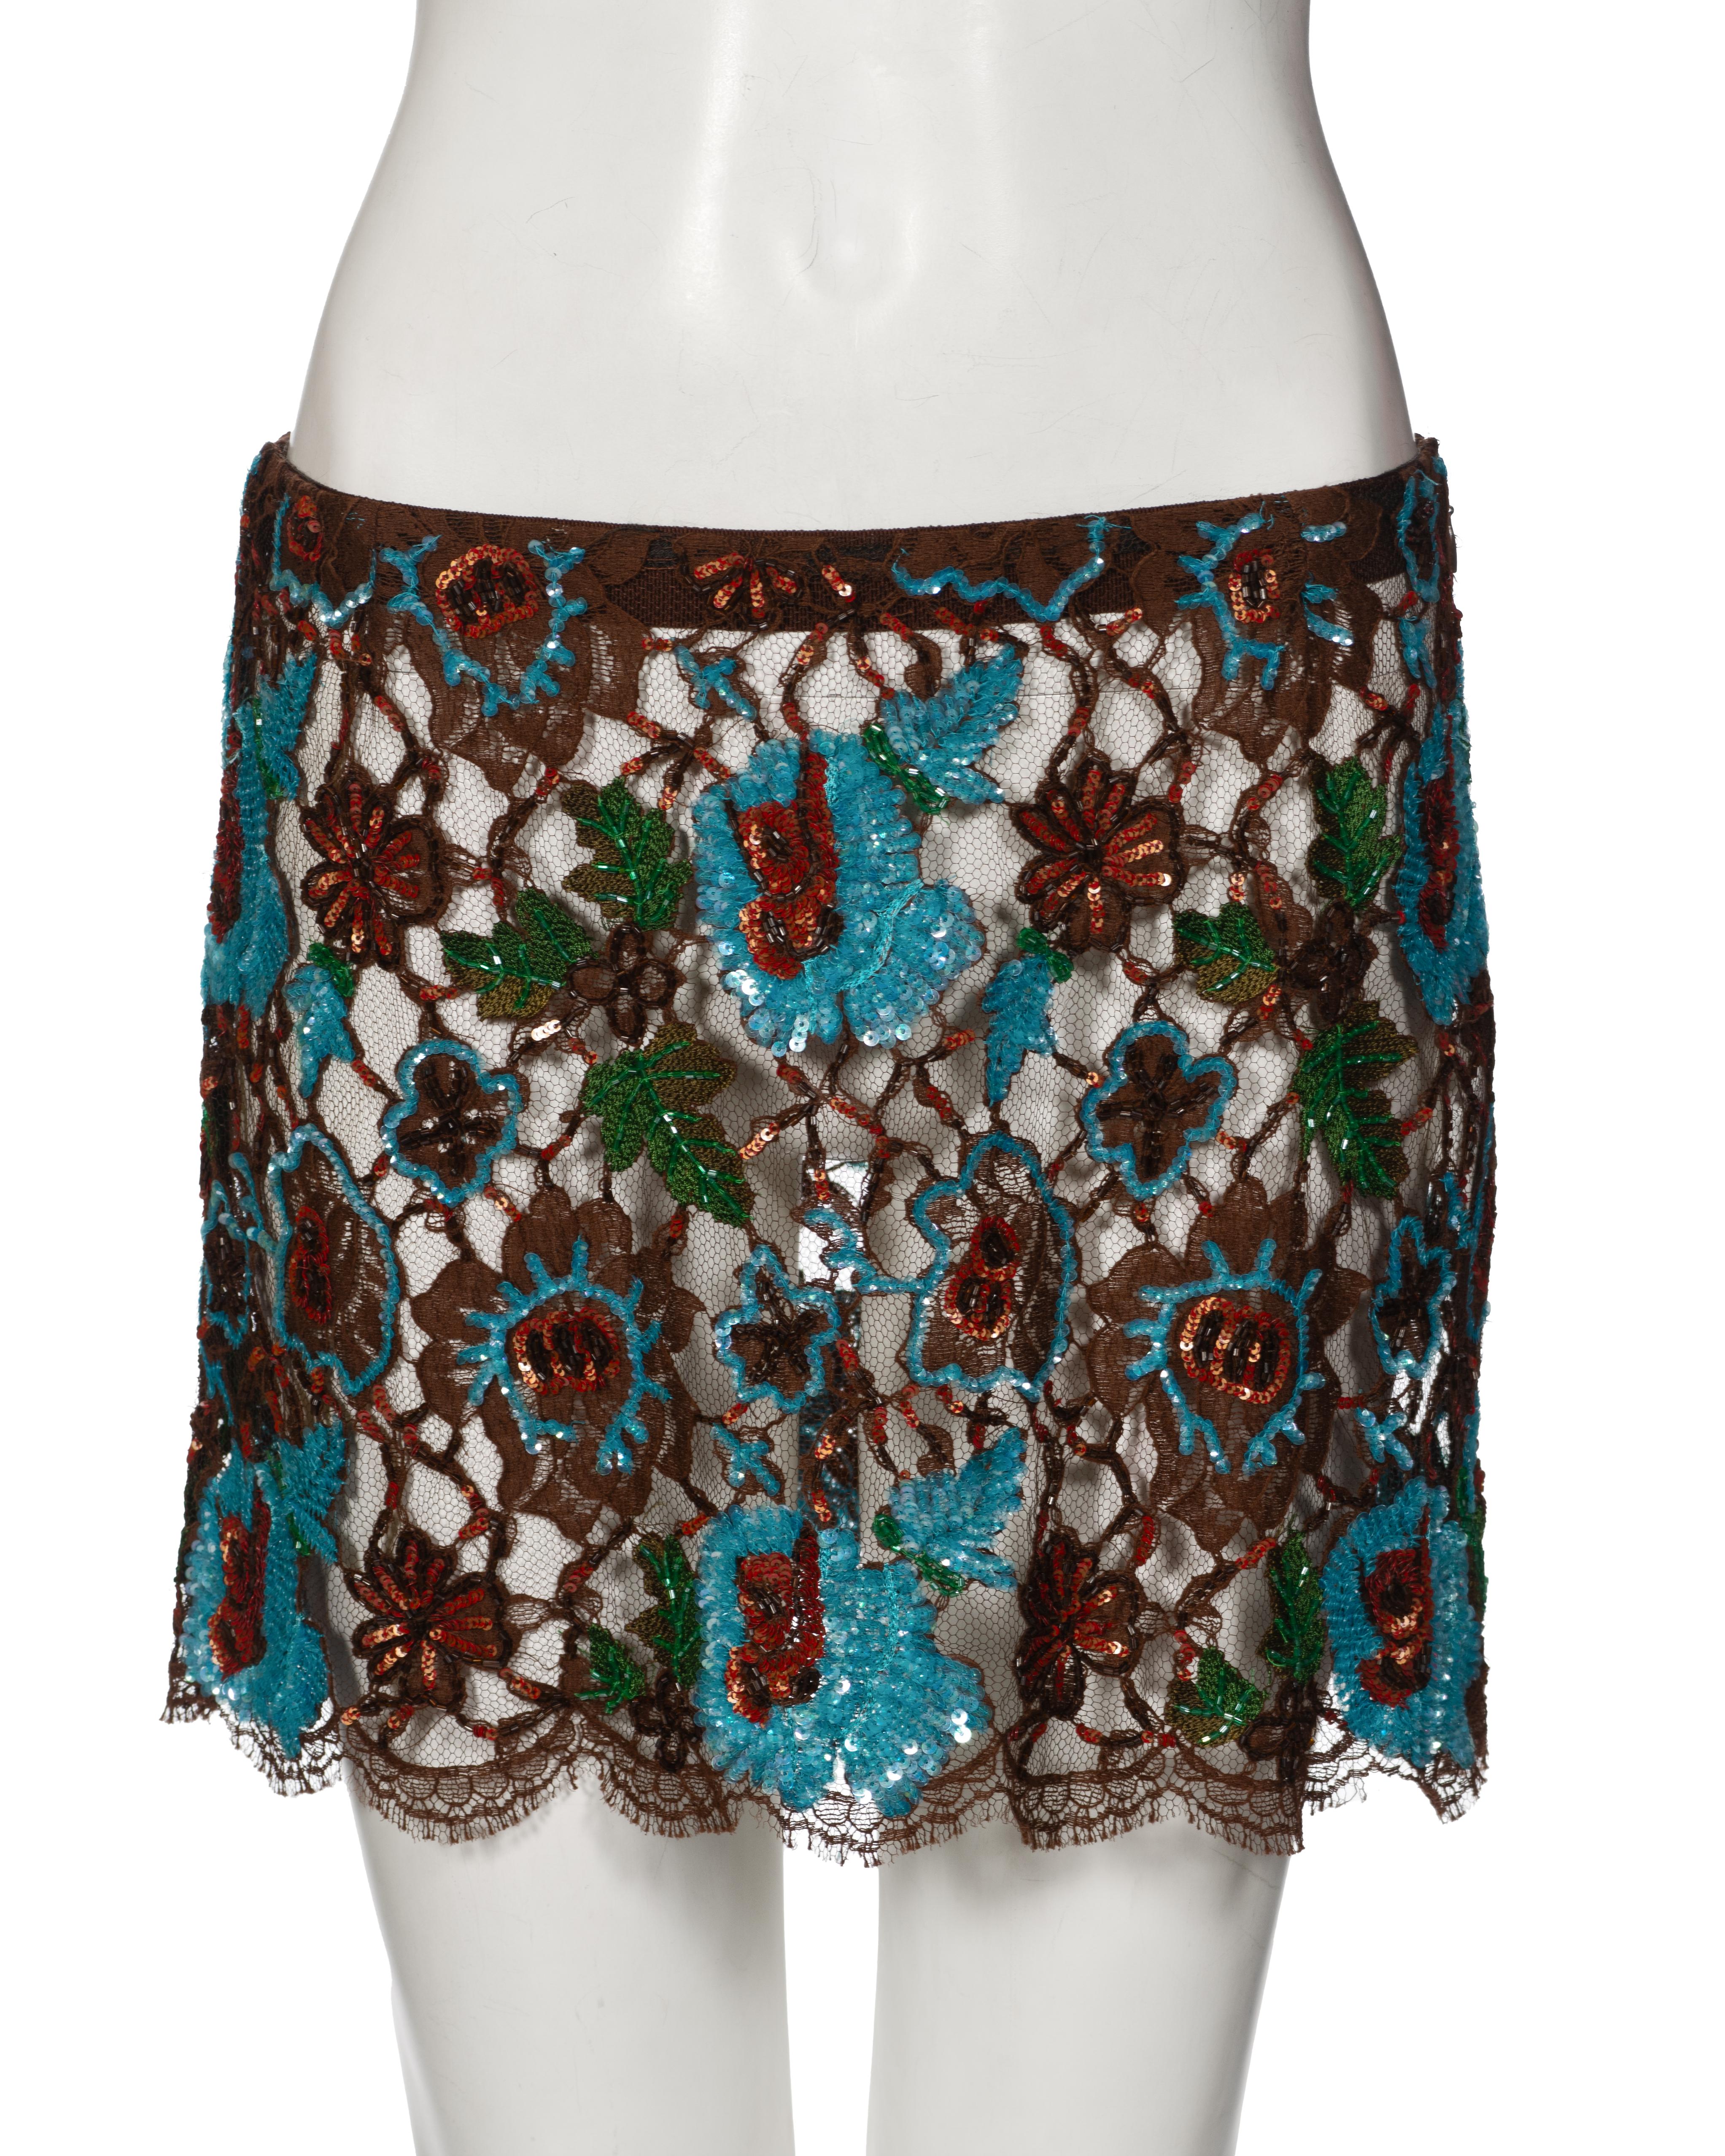 ▪ Dolce & Gabbana Embellished lace mini skirt
▪ Fall-Winter 1999
▪ Sold by One of a Kind Archive
▪ Intricate floral beadwork
▪ Sheer lace overlay
▪ Regular fit
▪ Material: 80% Cotton, 20% Nylon
▪ Colours: Brown, Blue, Red, Green
▪ Size: IT42 - FR38